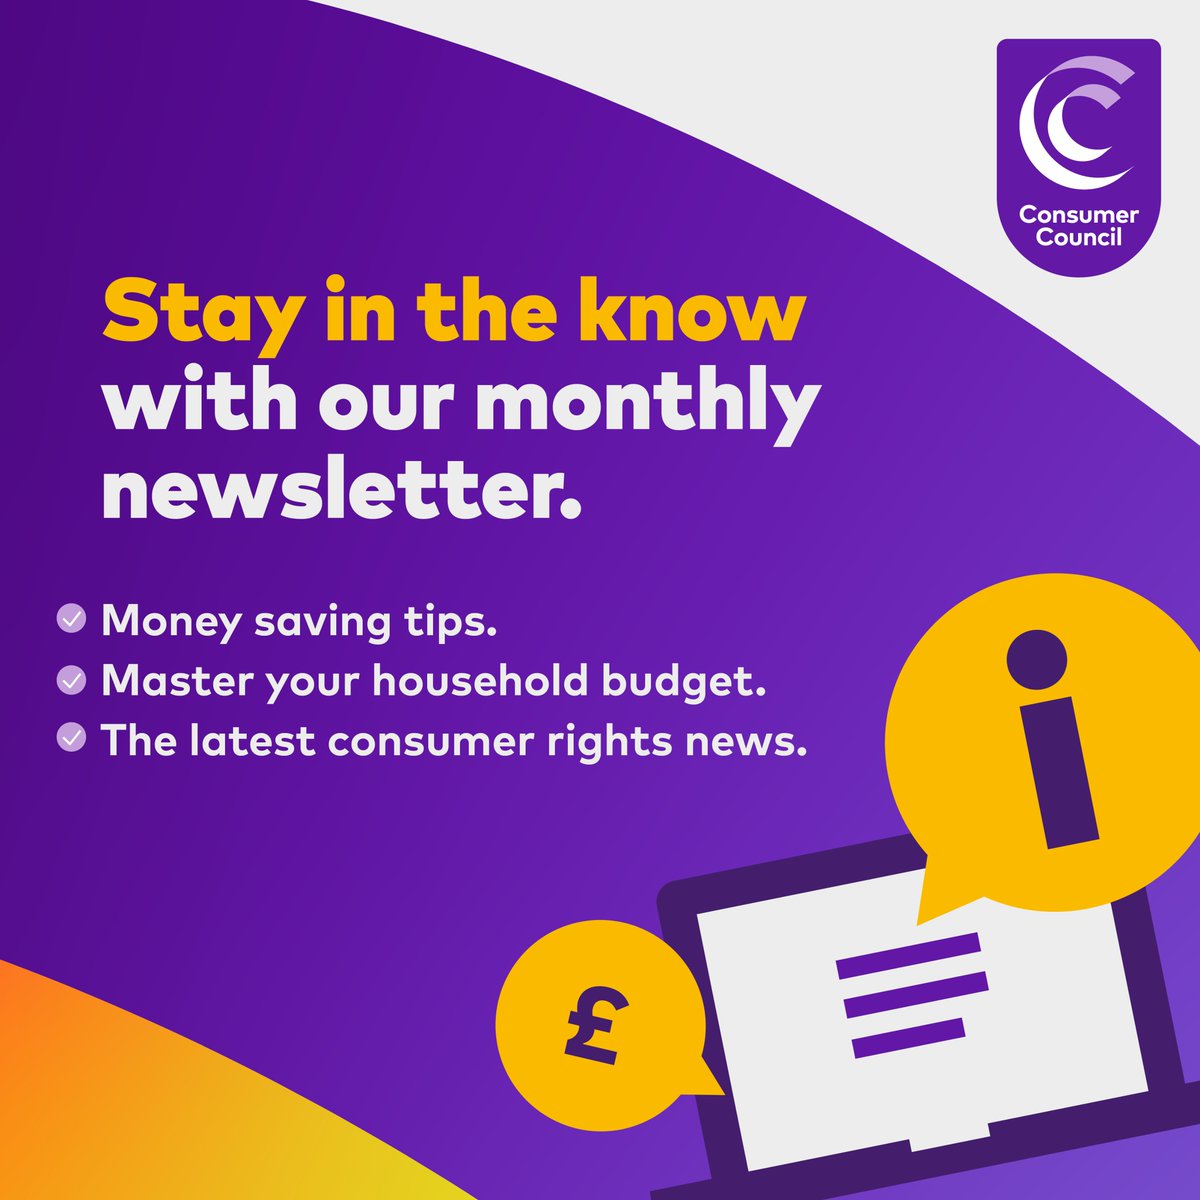 Our latest newsletter is now out. This month we have: 🟣 advice for Easter travel 🟣 tips on mobile roaming 🟣 food storage myths 🟣 Royal Mail postal services price increase 🟣 how to save money on your internet package...and lots more! Read it now - mailchi.mp/consumercounci…